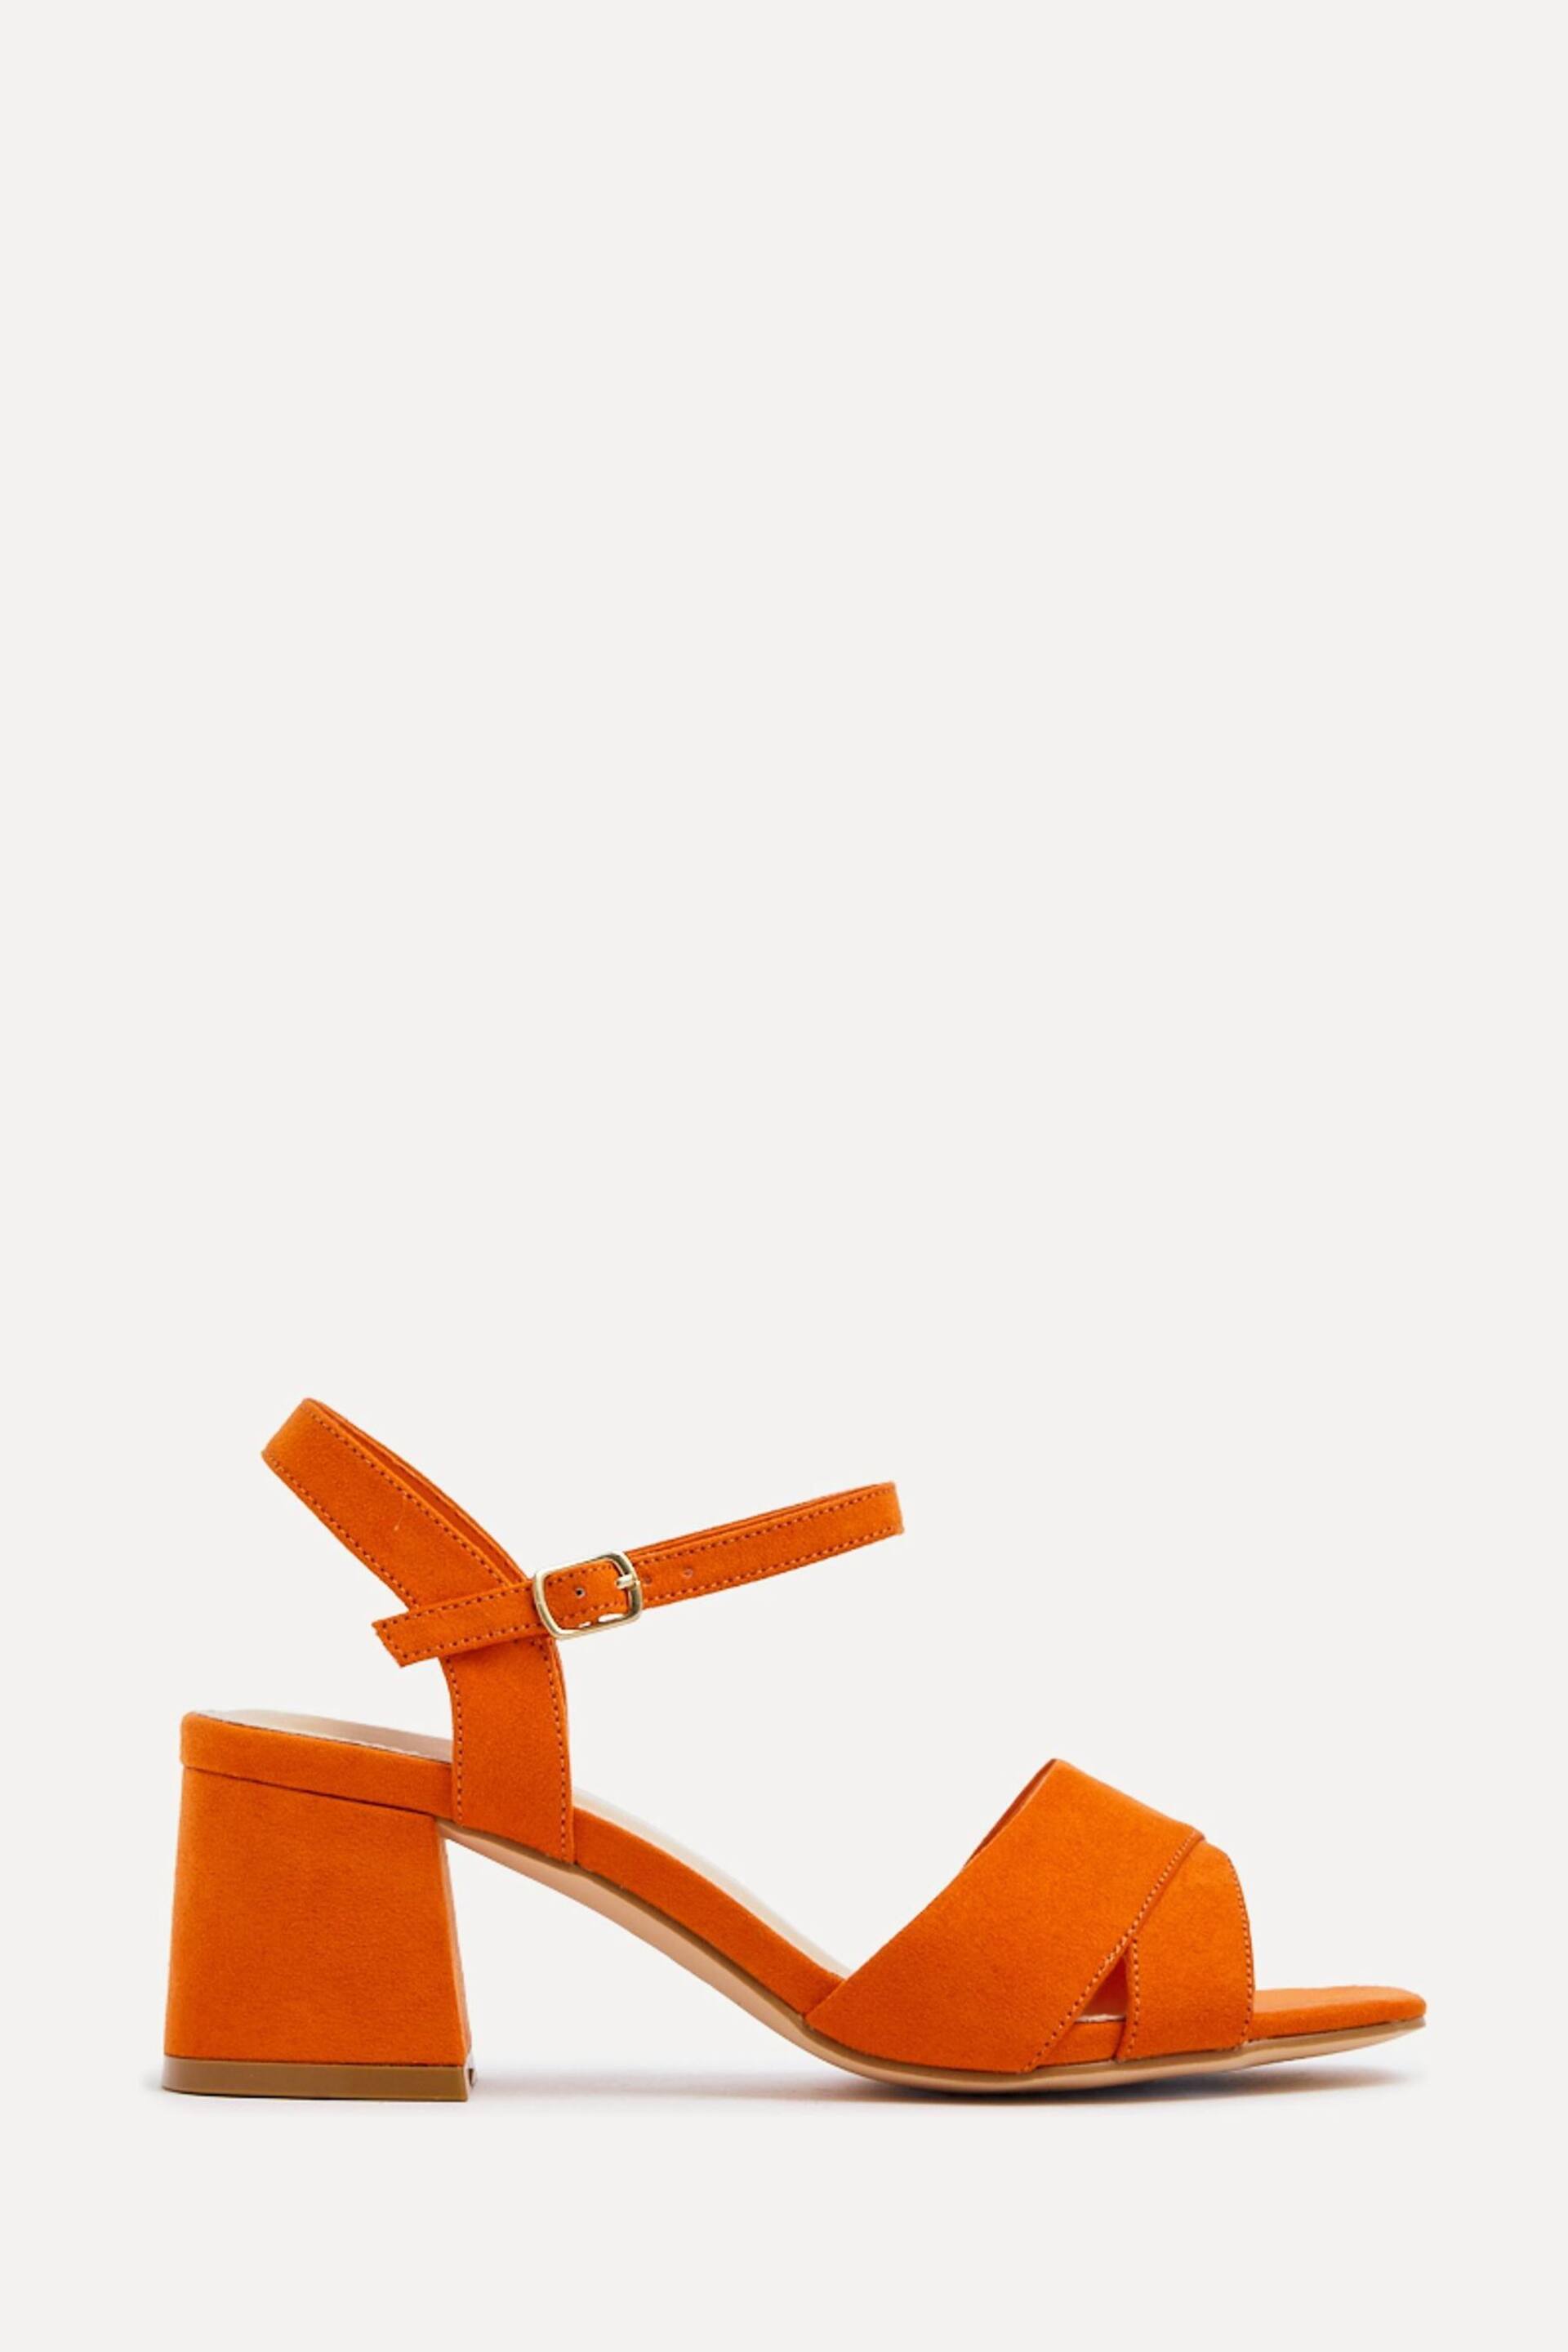 Linzi Orange Vivian Wide Fit Heeled Sandals With Crossover Front Strap - Image 2 of 5